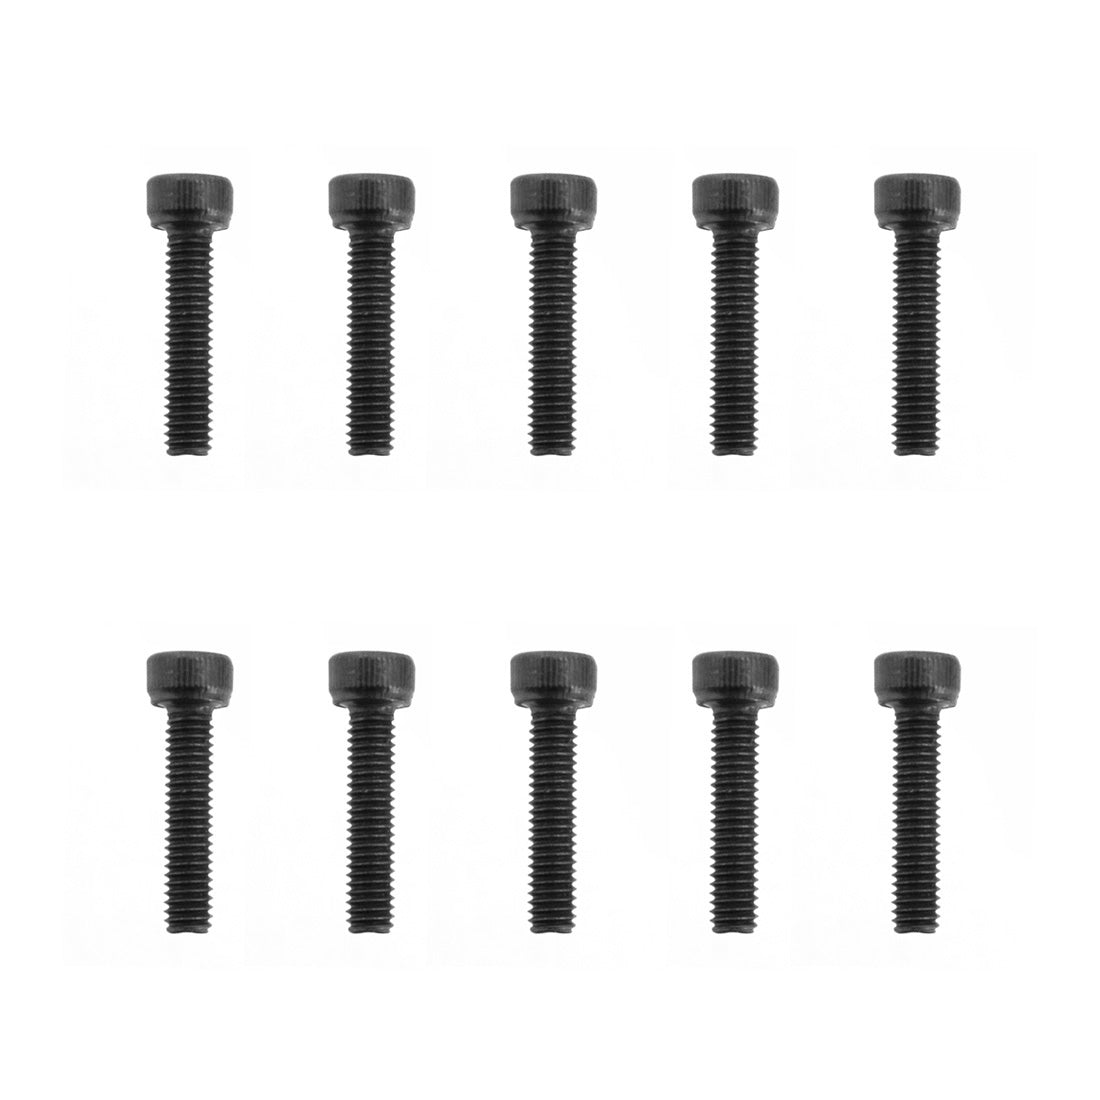 XERO Pole Replacement Clamp Bolt - Pack of 10 Pack View